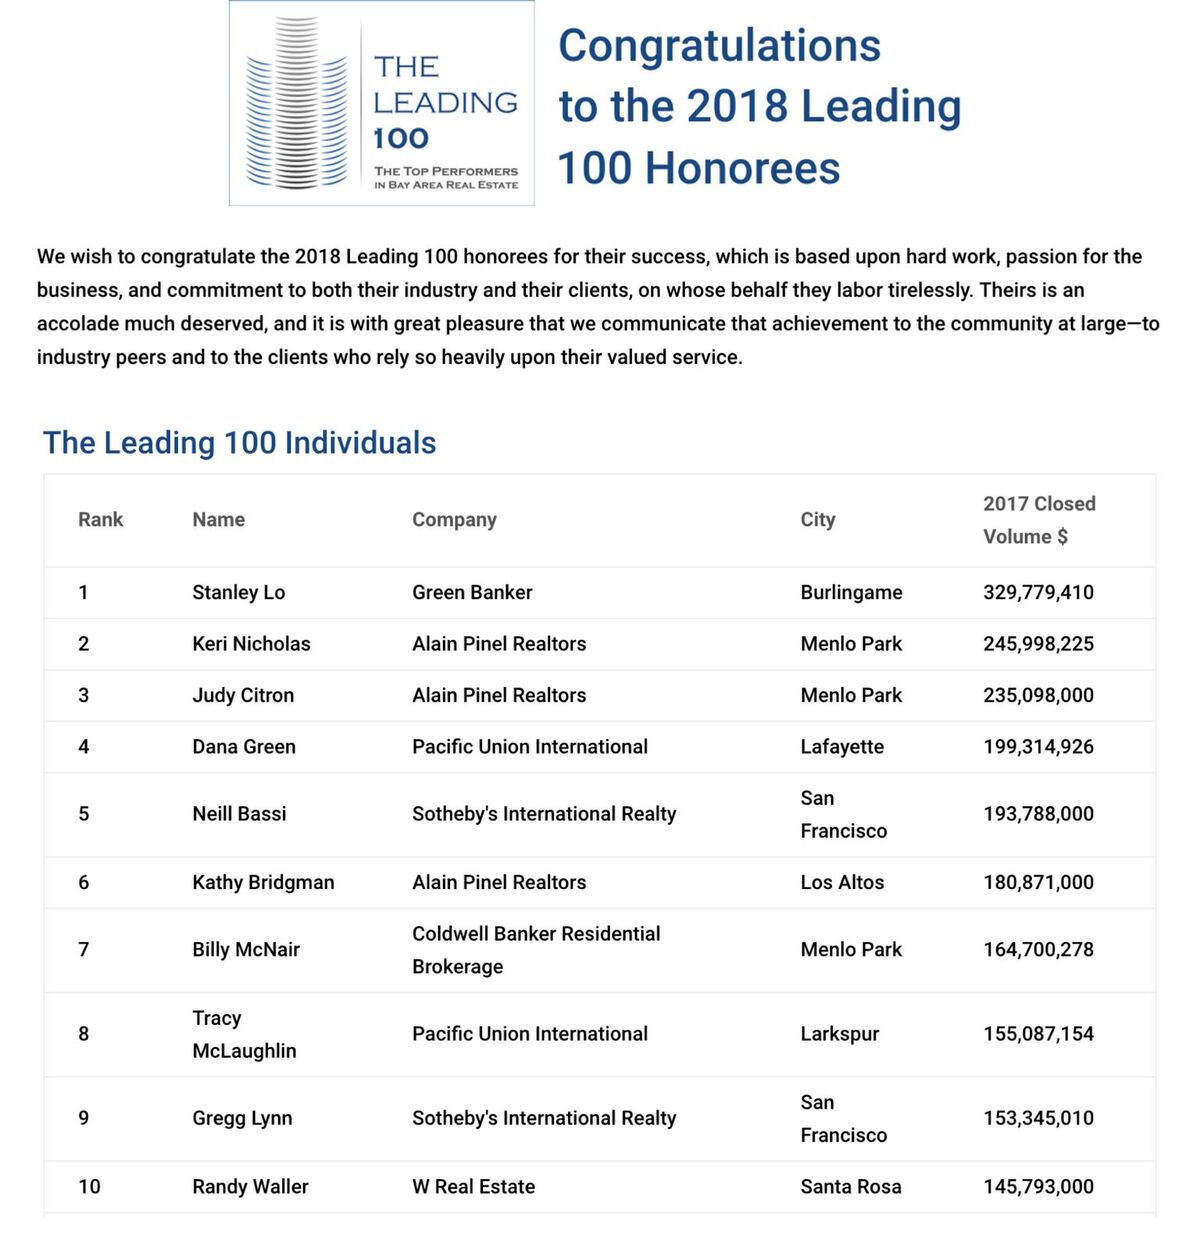 Congratulations to the 2018 Leading 100 Honorees